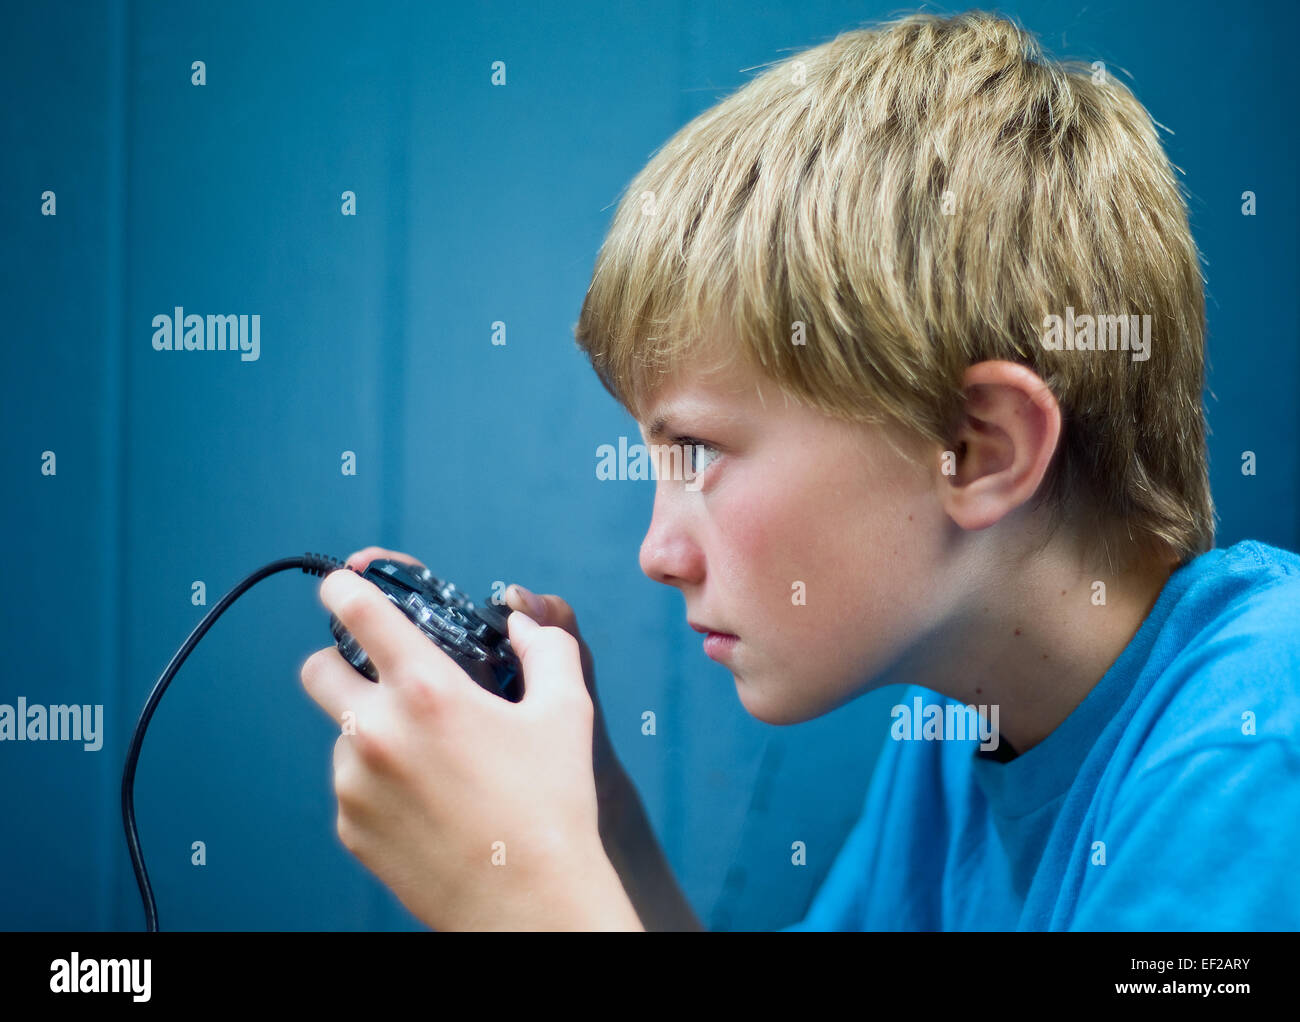 Young boy, 10-11-12-13, playing video game using controller with concentration Stock Photo